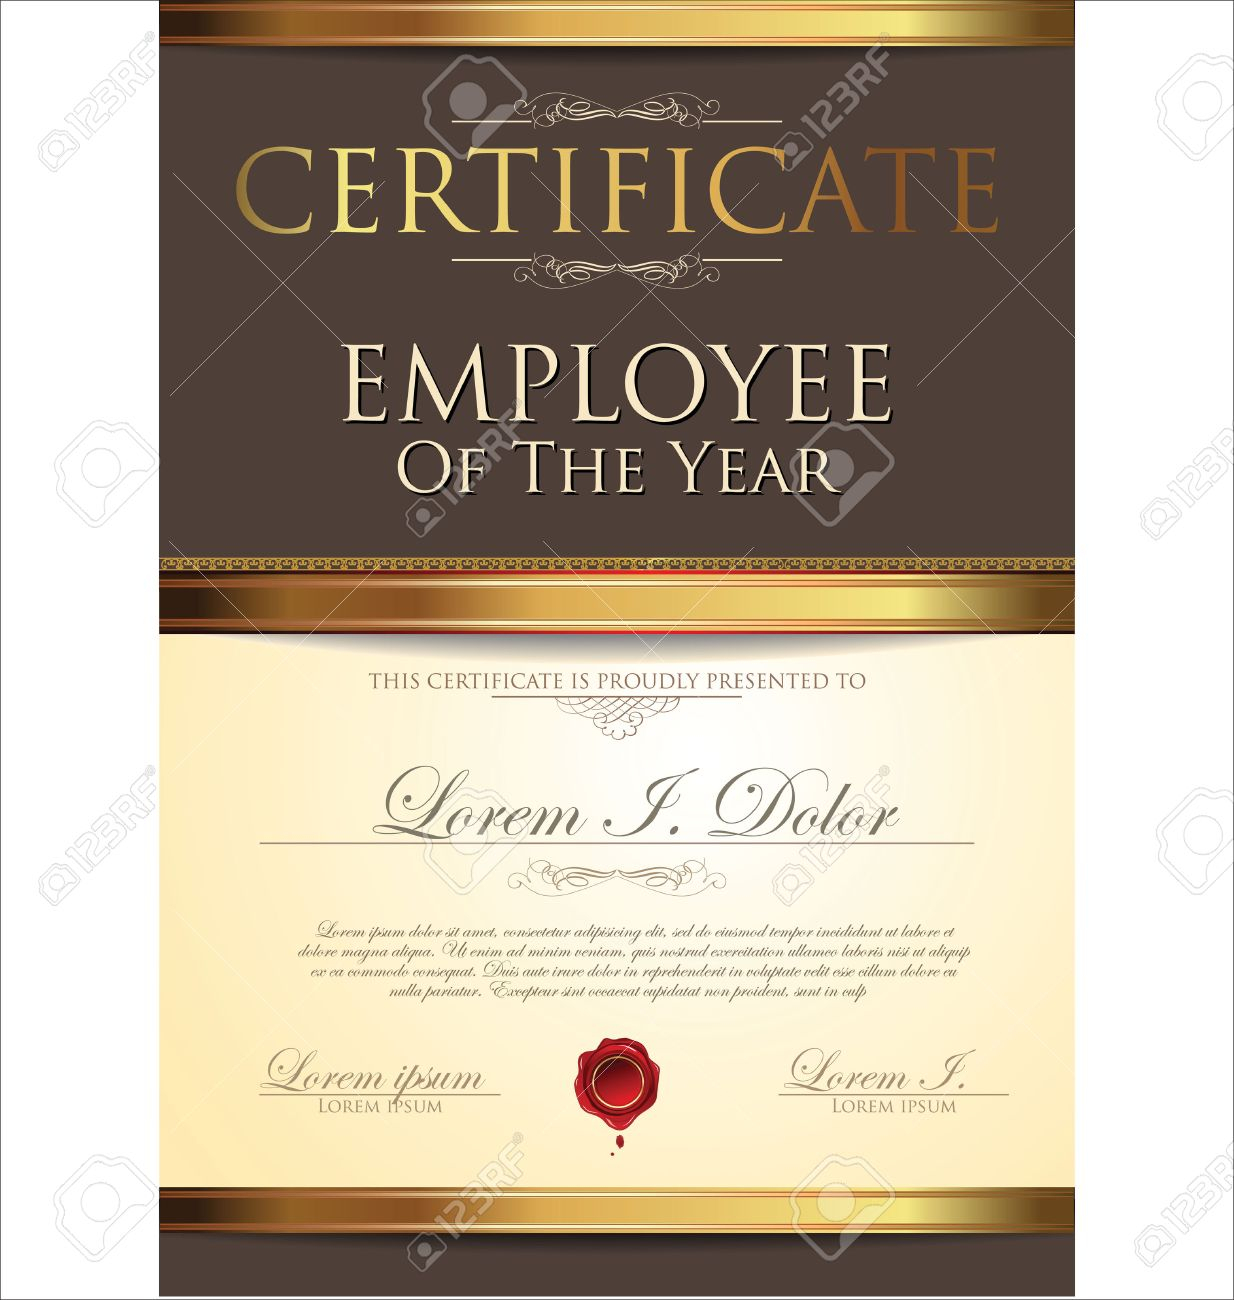 Certificate Template, Employee Of The Year Inside Employee Of The Year Certificate Template Free